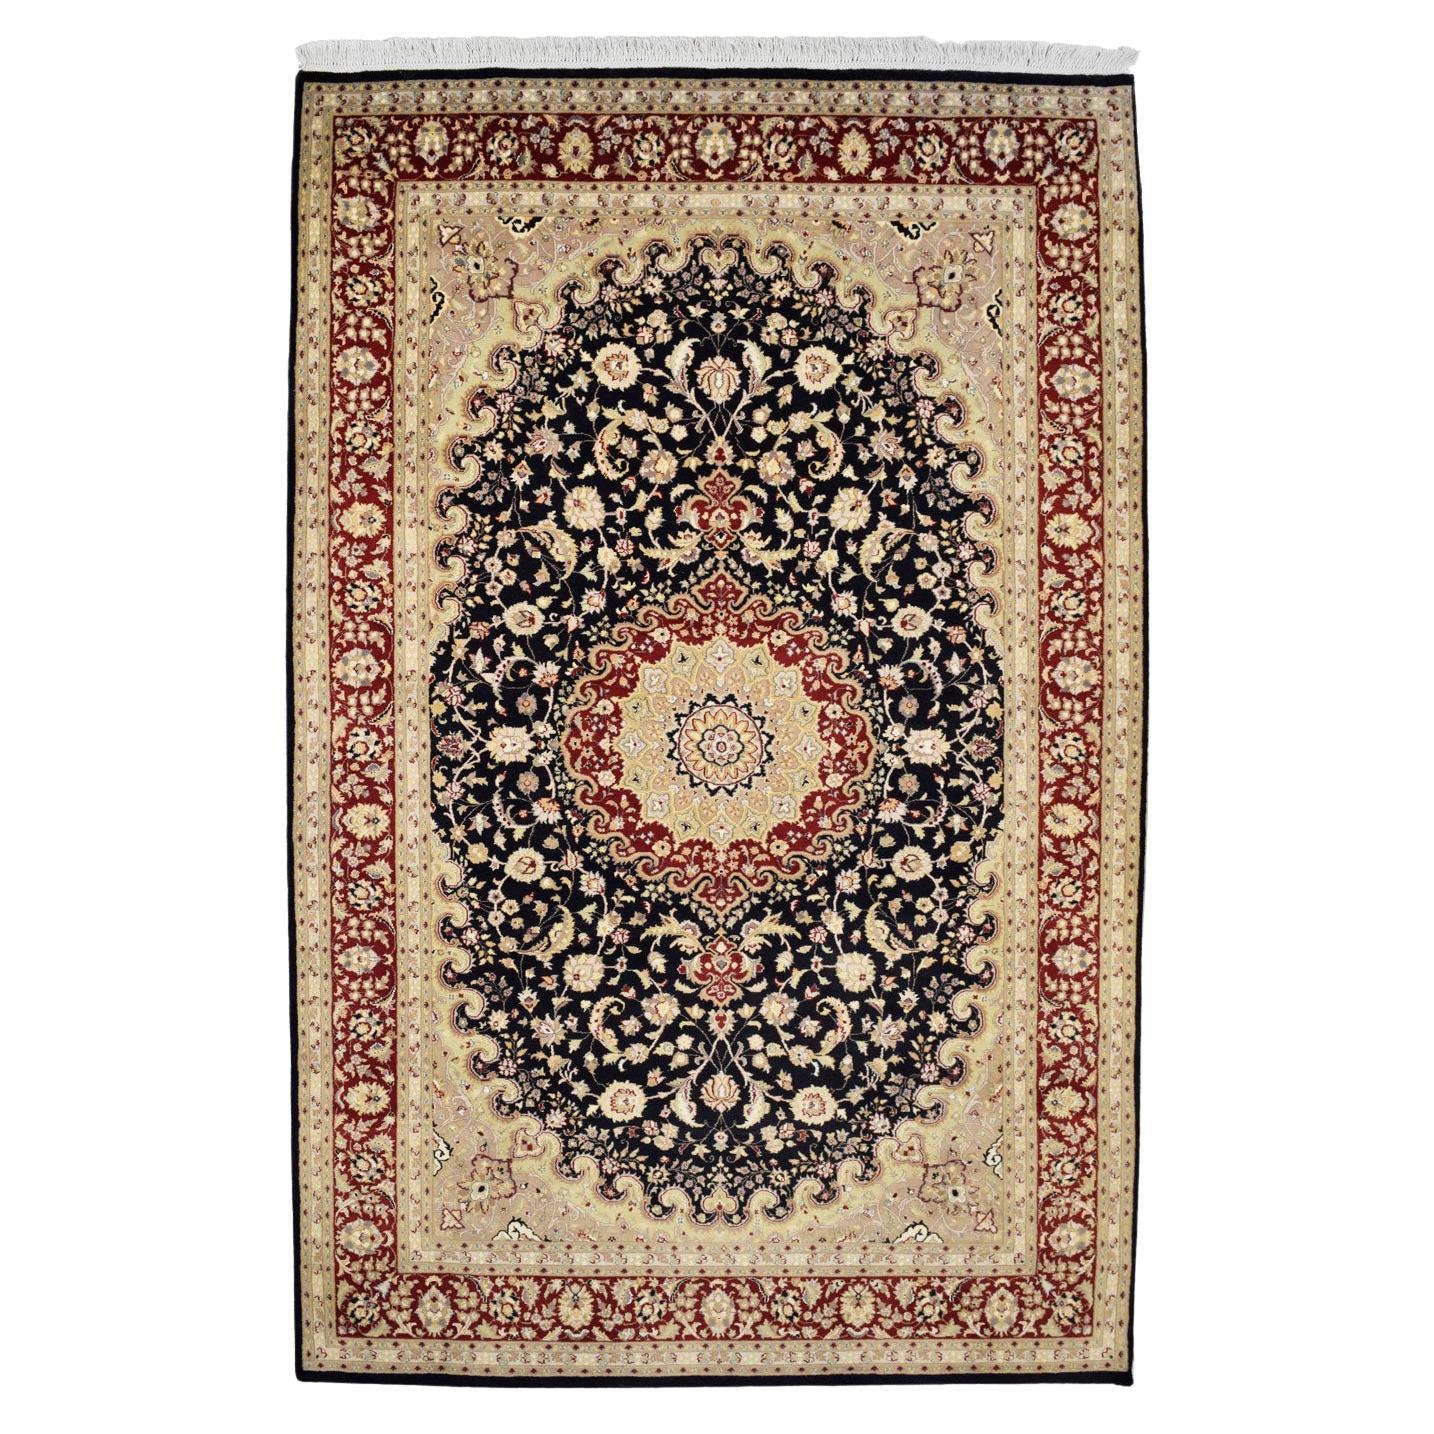 Classic Black, Gold, and Taupe Hand-Knotted Pak-Tabriz Carpet, 6’ x 9’ For Sale